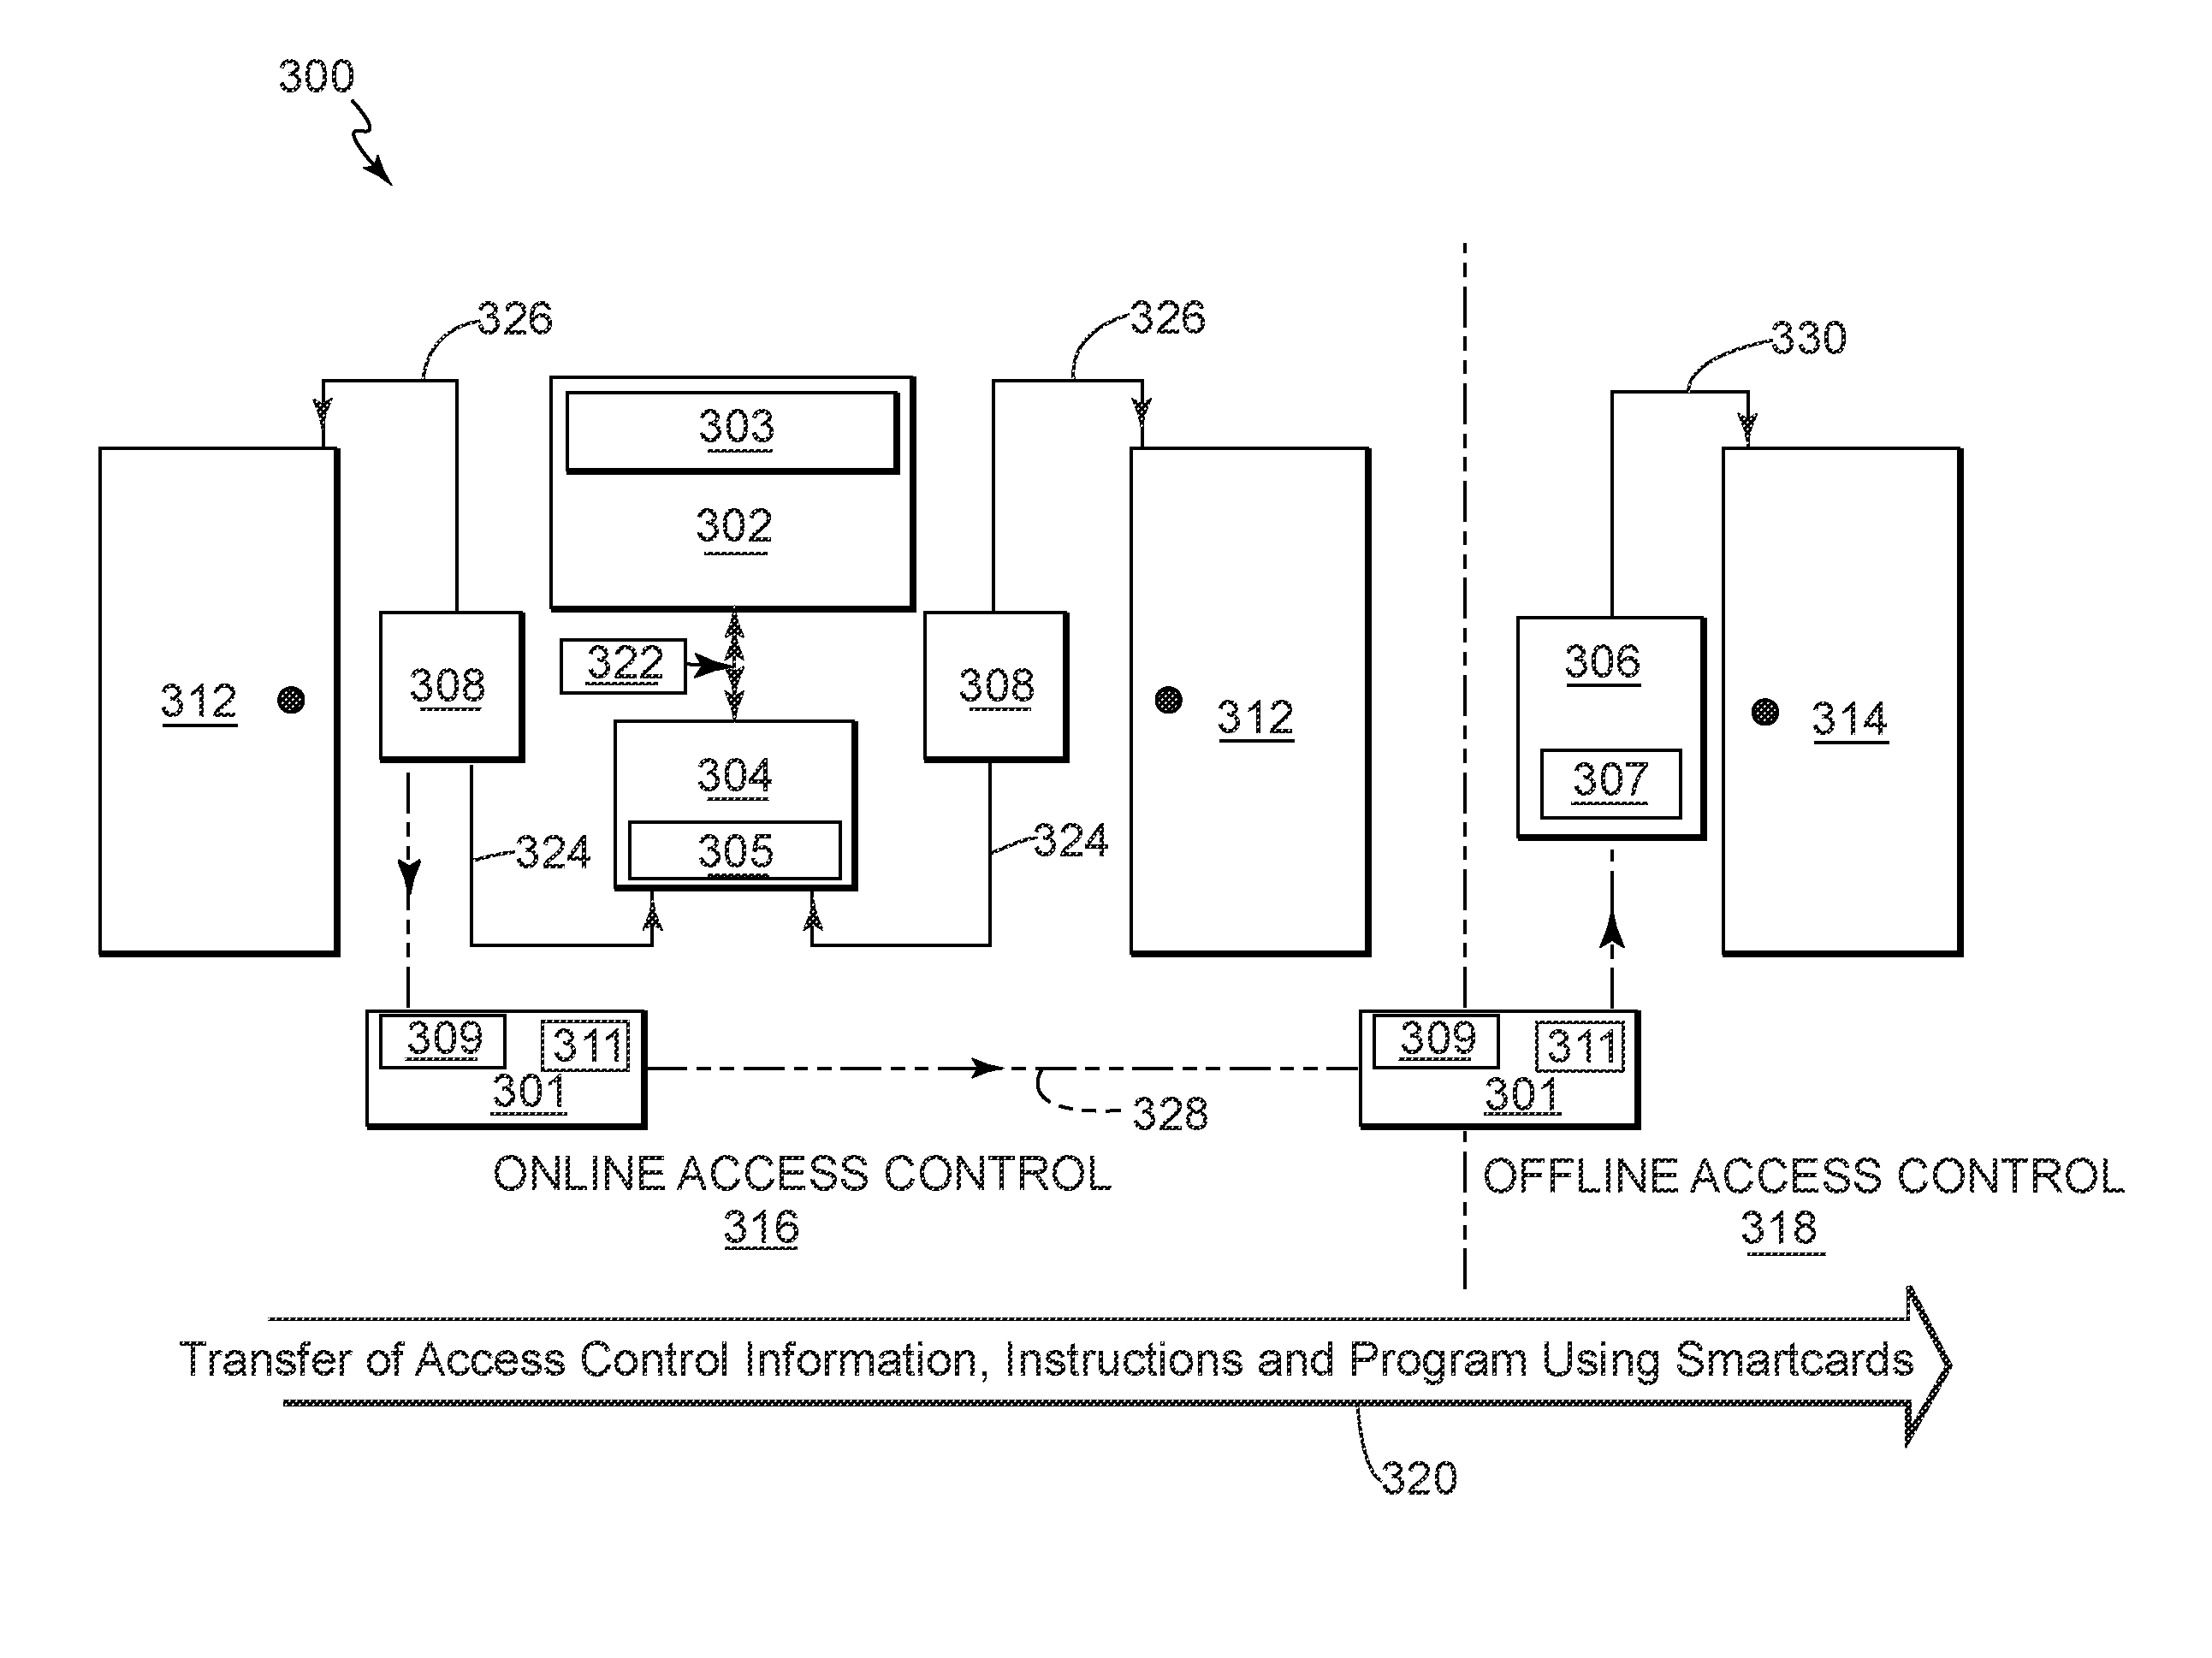 Physical access control system with smartcard and methods of operating